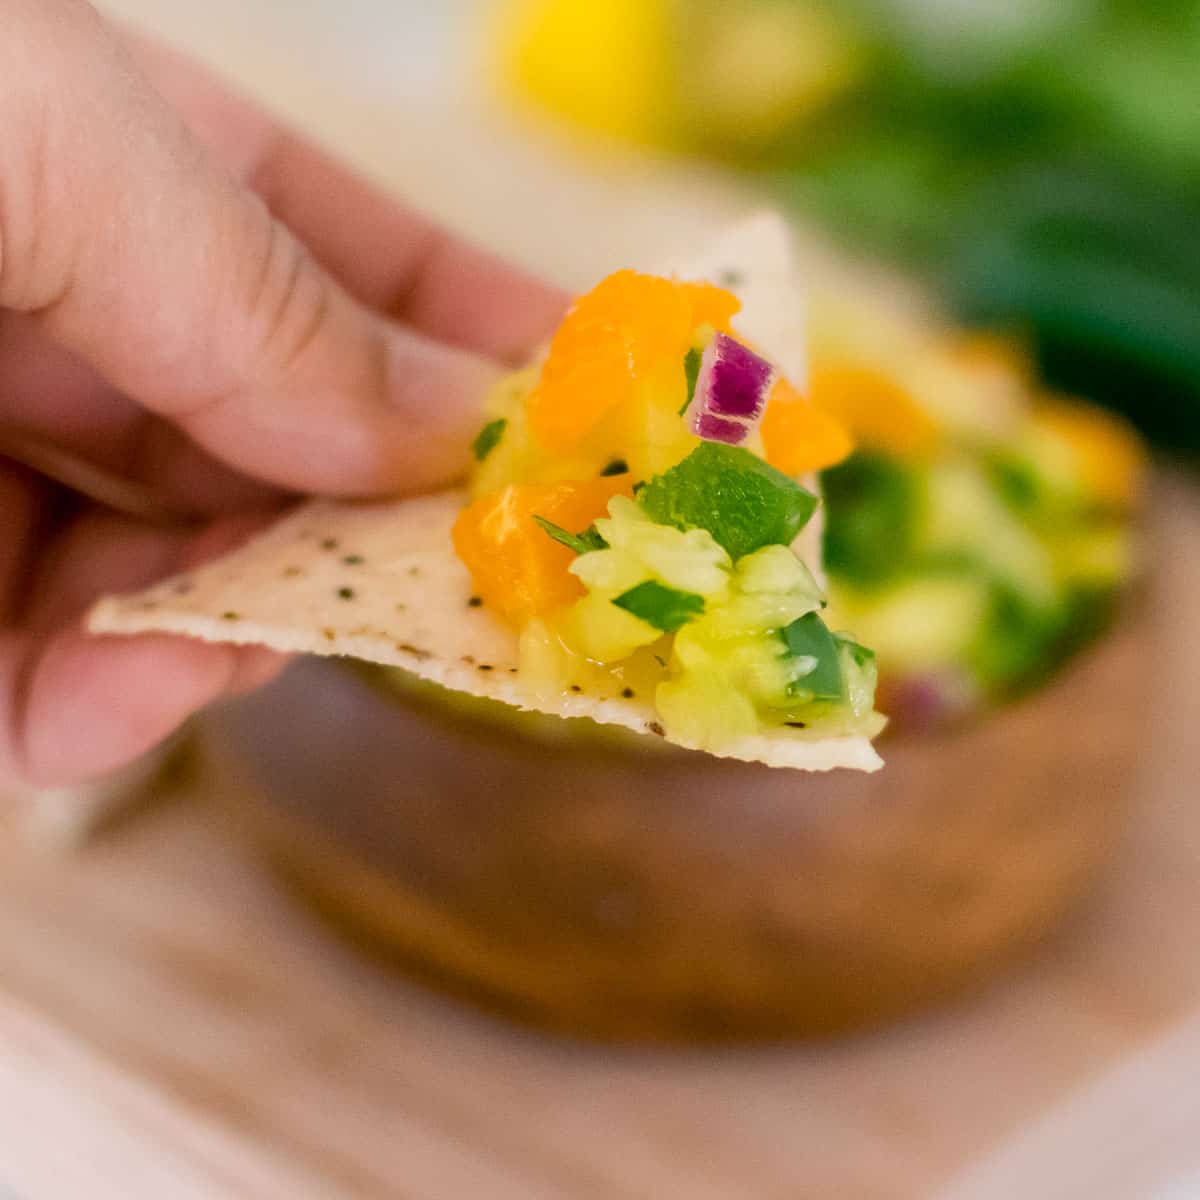 hand holding a chip with pineapple jalapeno salsa on it.